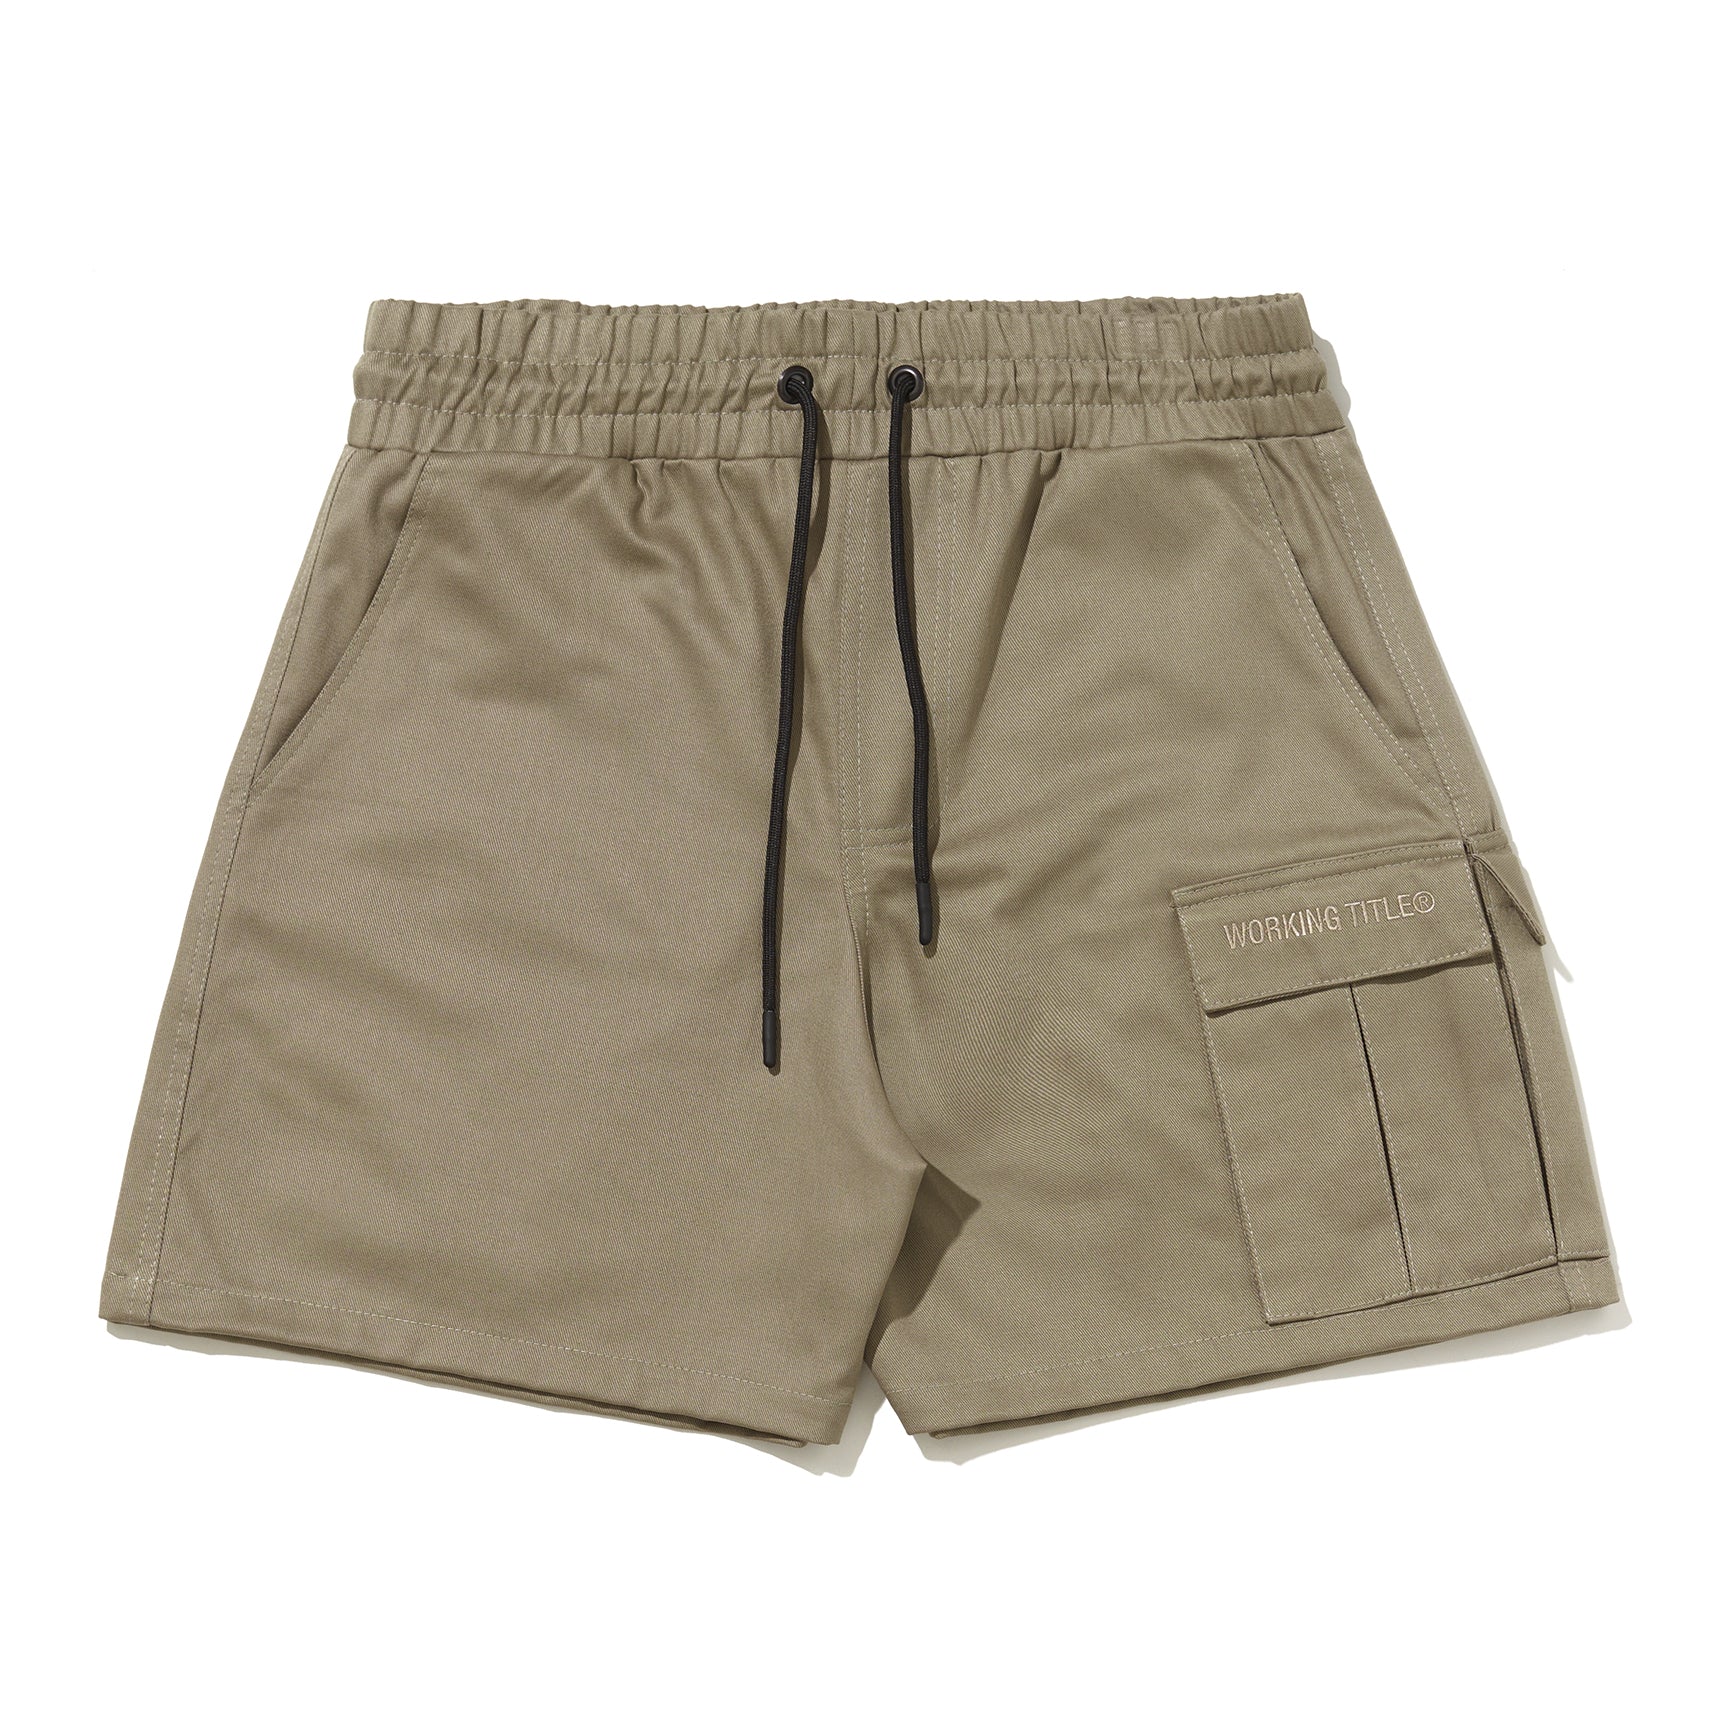 WORKING TITLE® Cargo Shorts